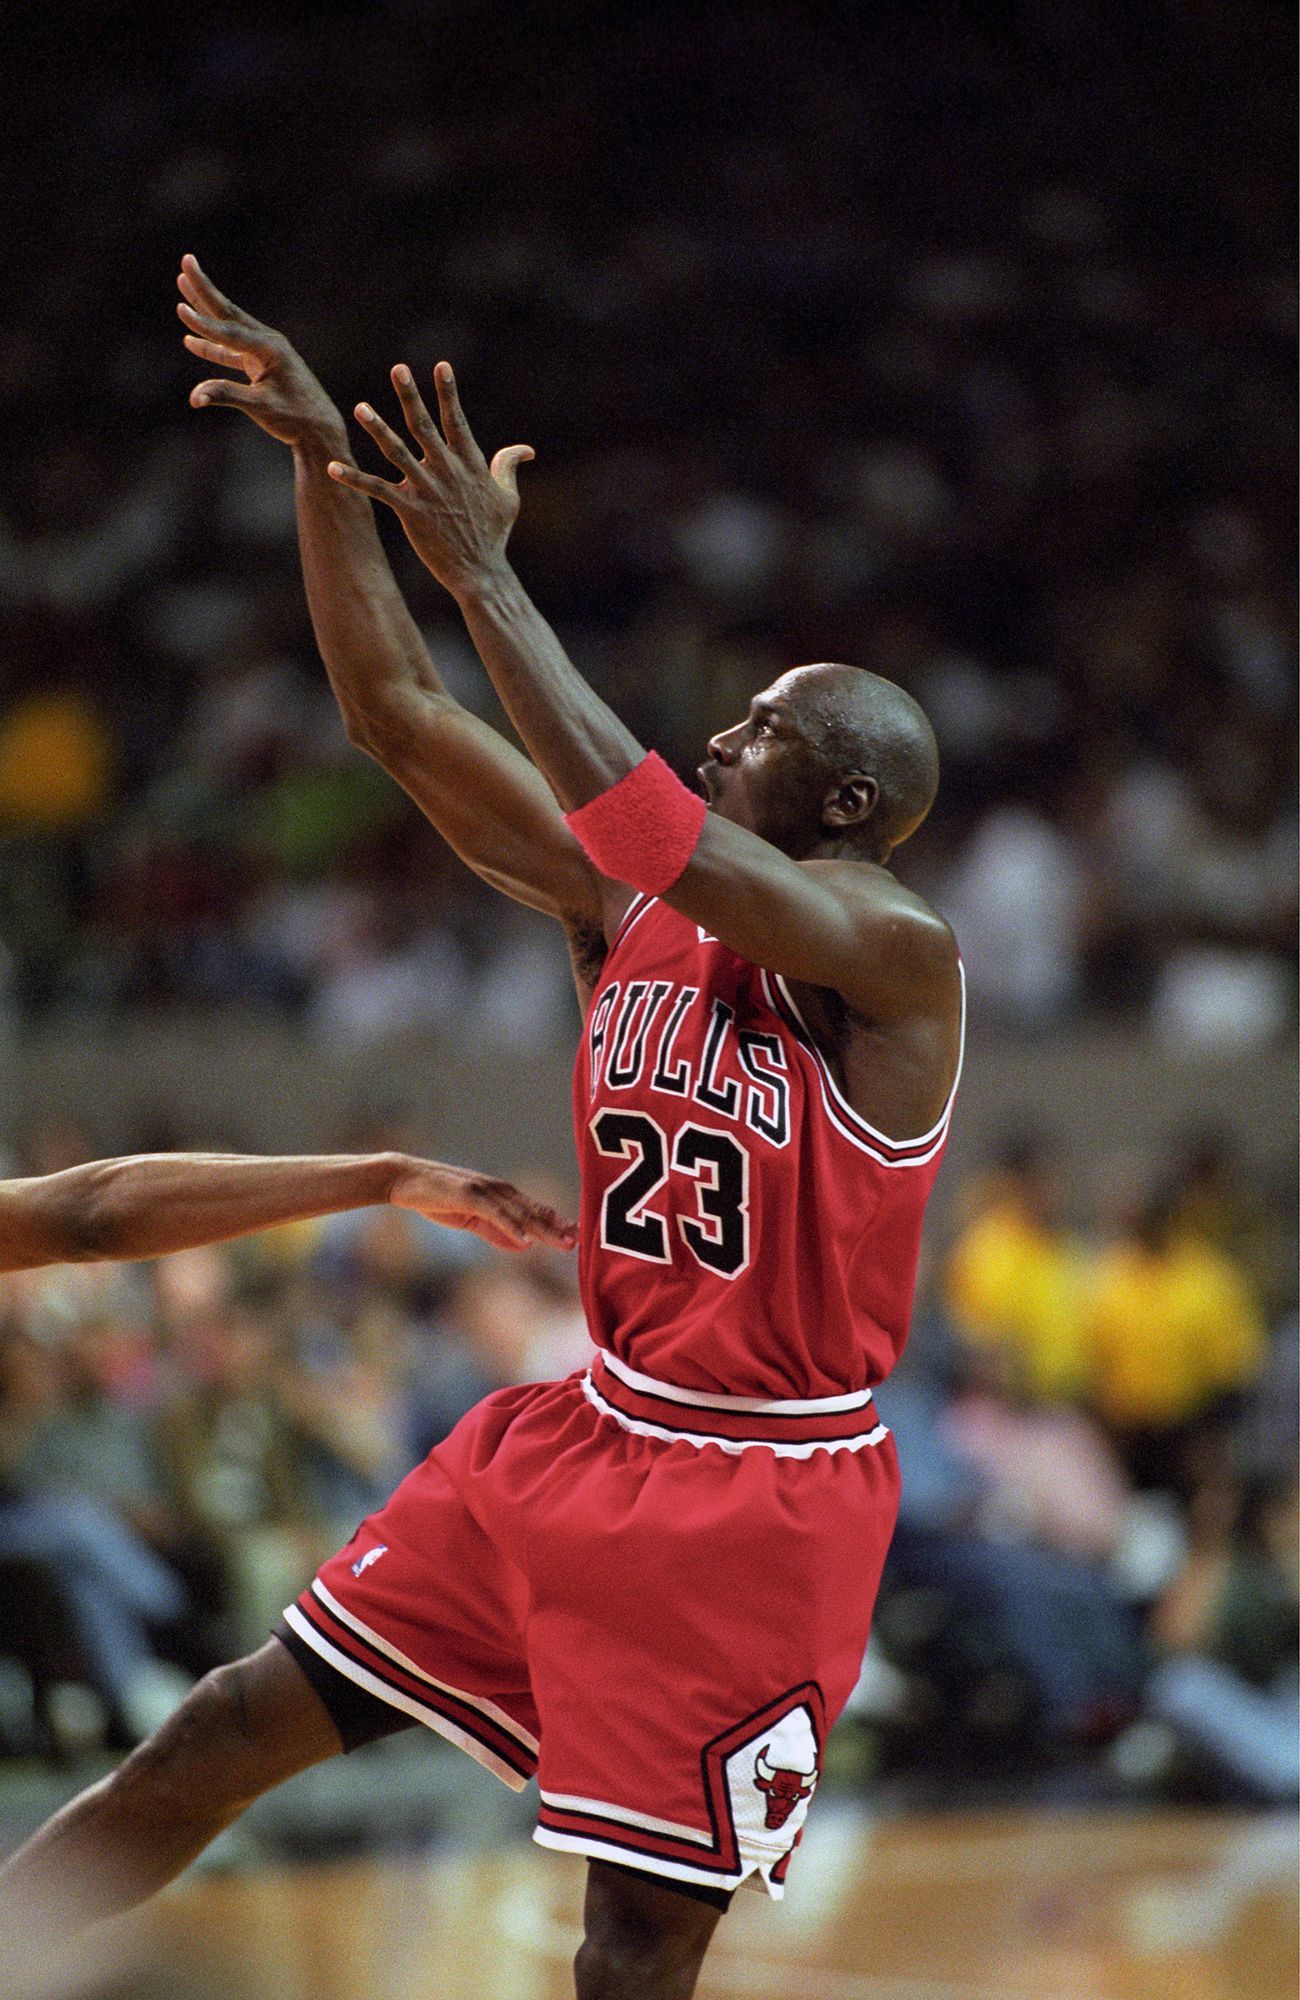 Michael Jordan of the Chicago Bulls passes the ball during a game against the Portland Trail Blazers in 1992. - Michael Jordan